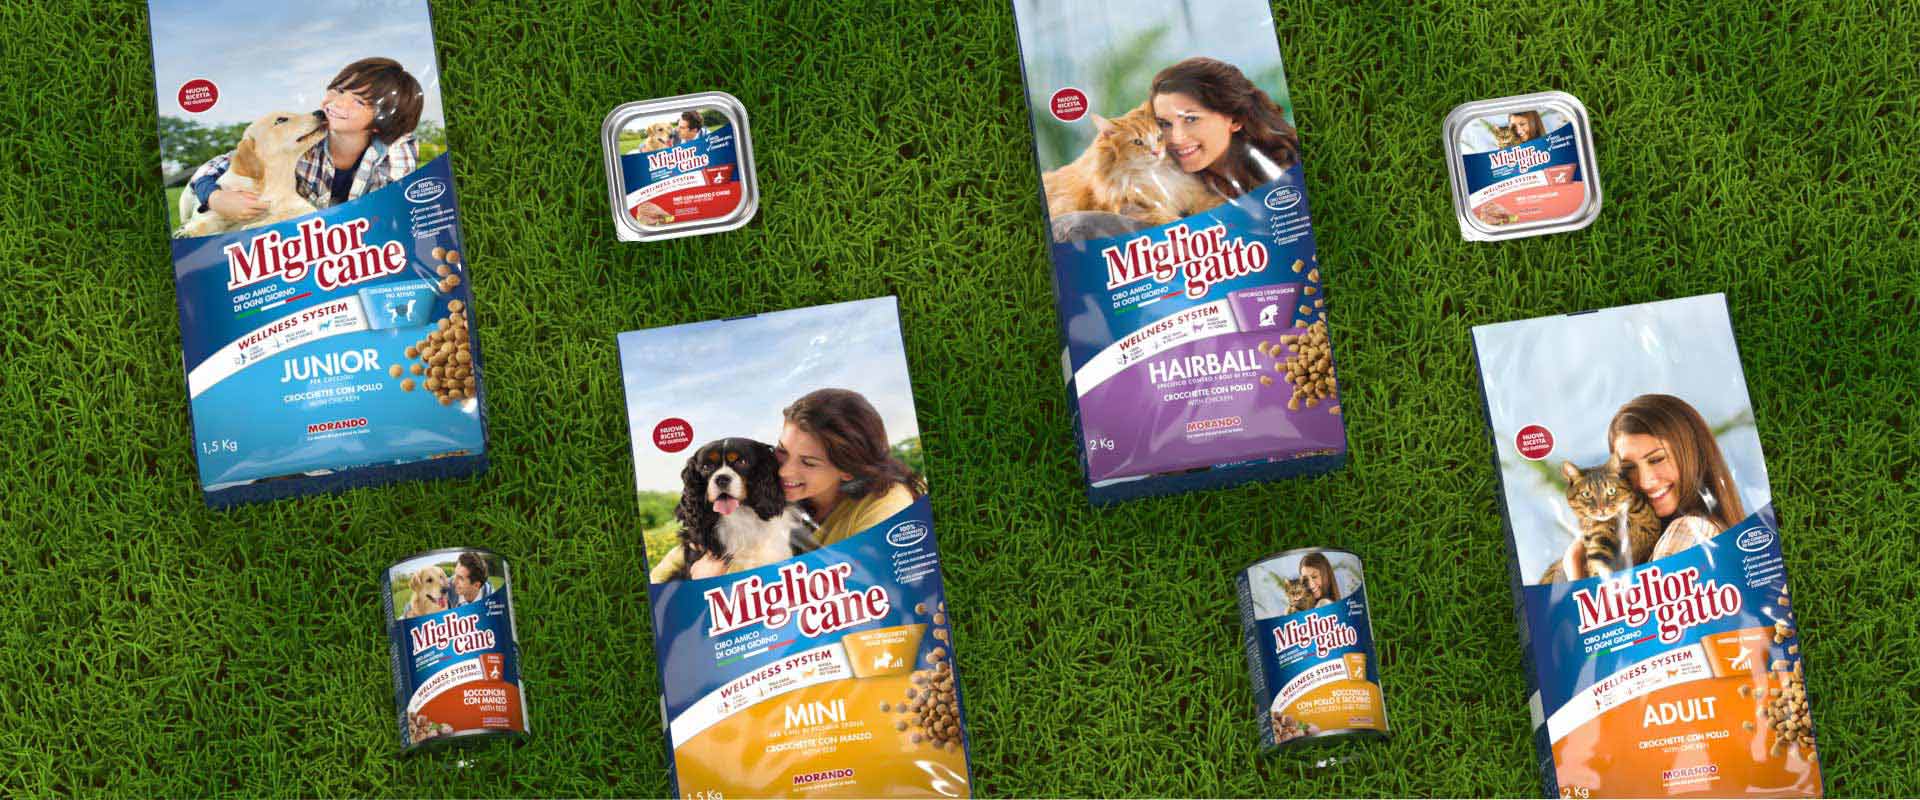 New packaging by ATC for MigliorCane and MigliorGatto